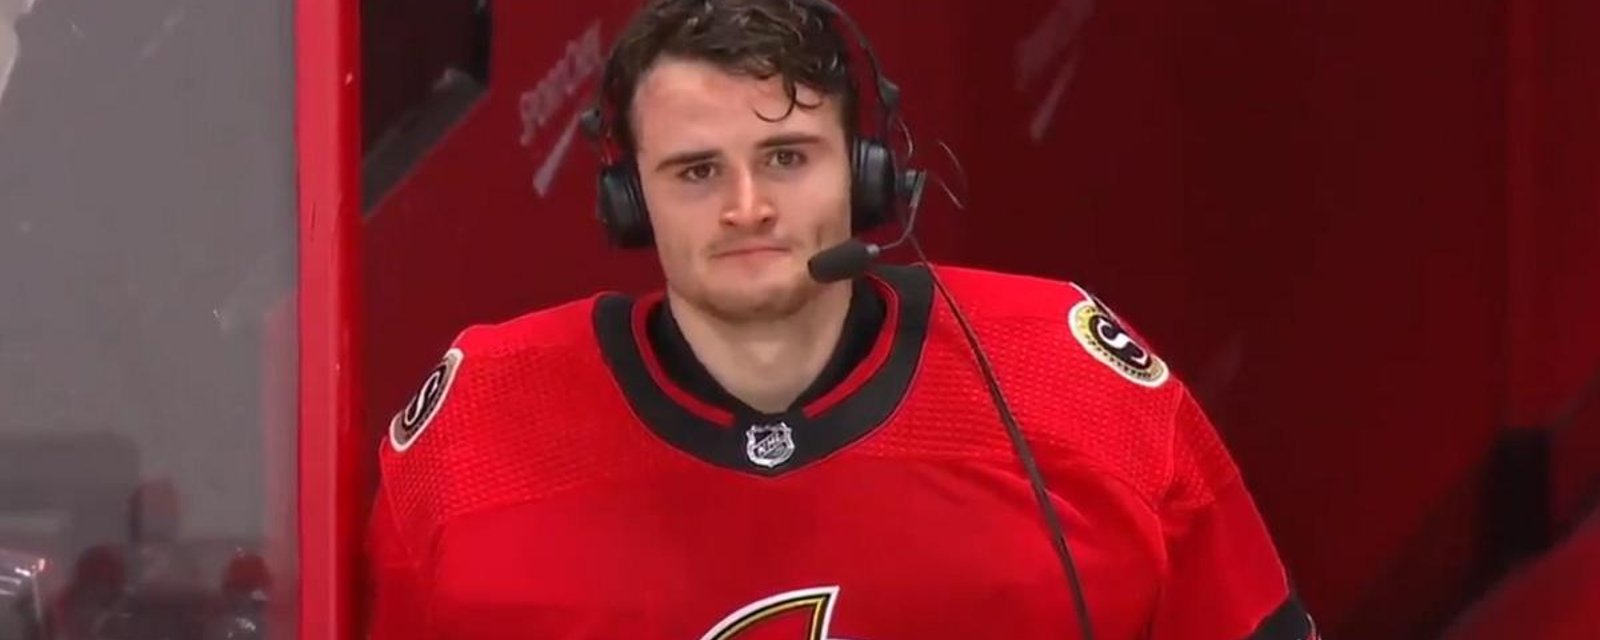 Joey Daccord can't hold back tears after earning his first NHL win against his father's team.